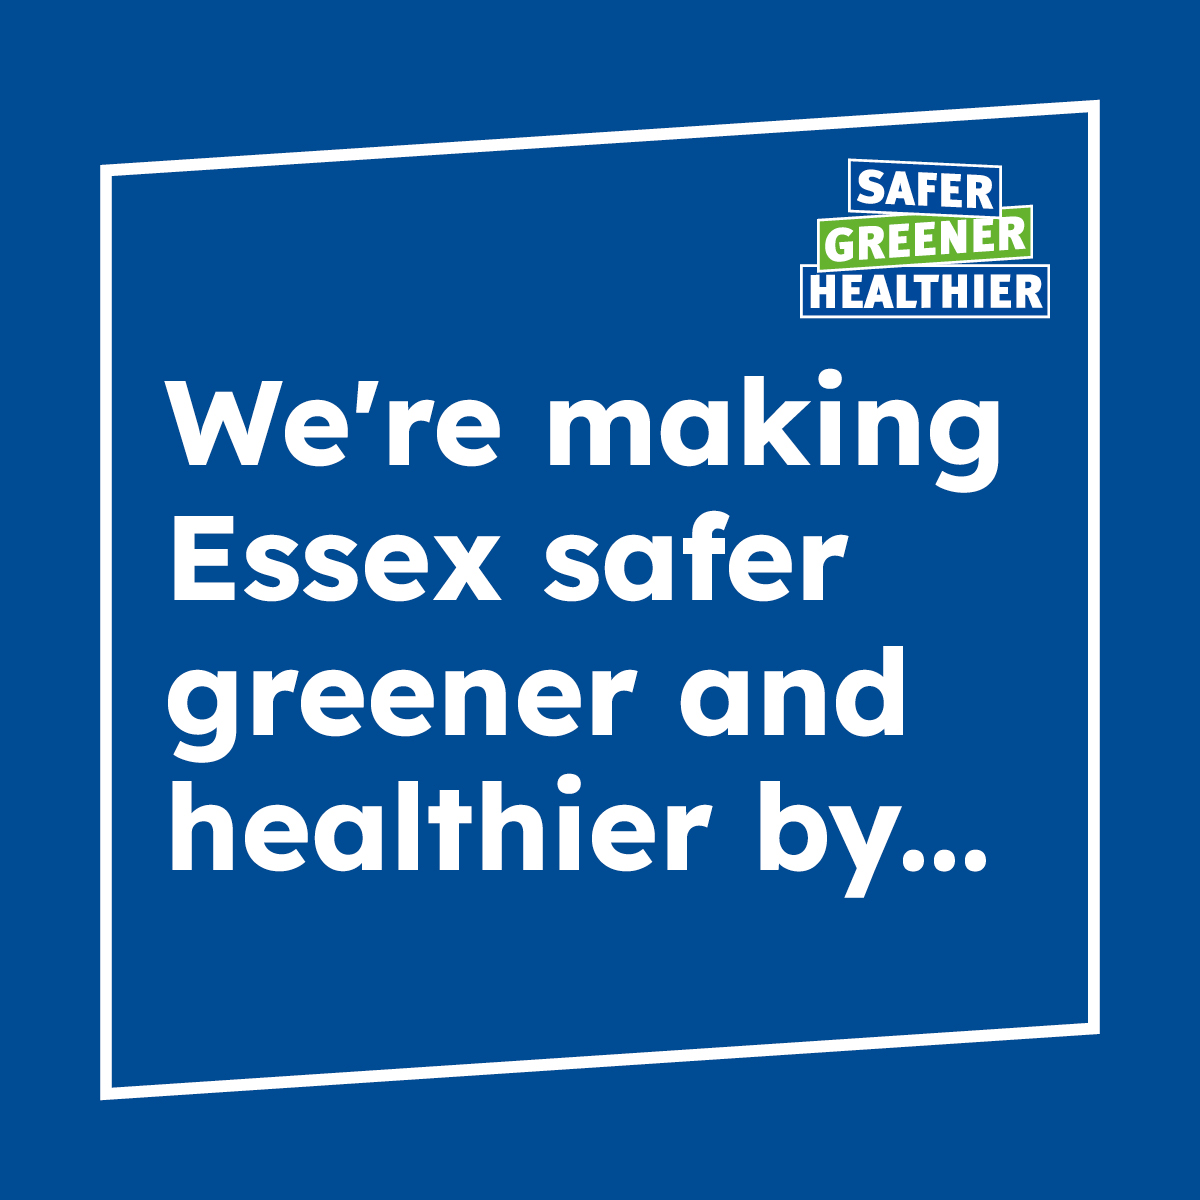 We're making Essex safer greener and healthier by...